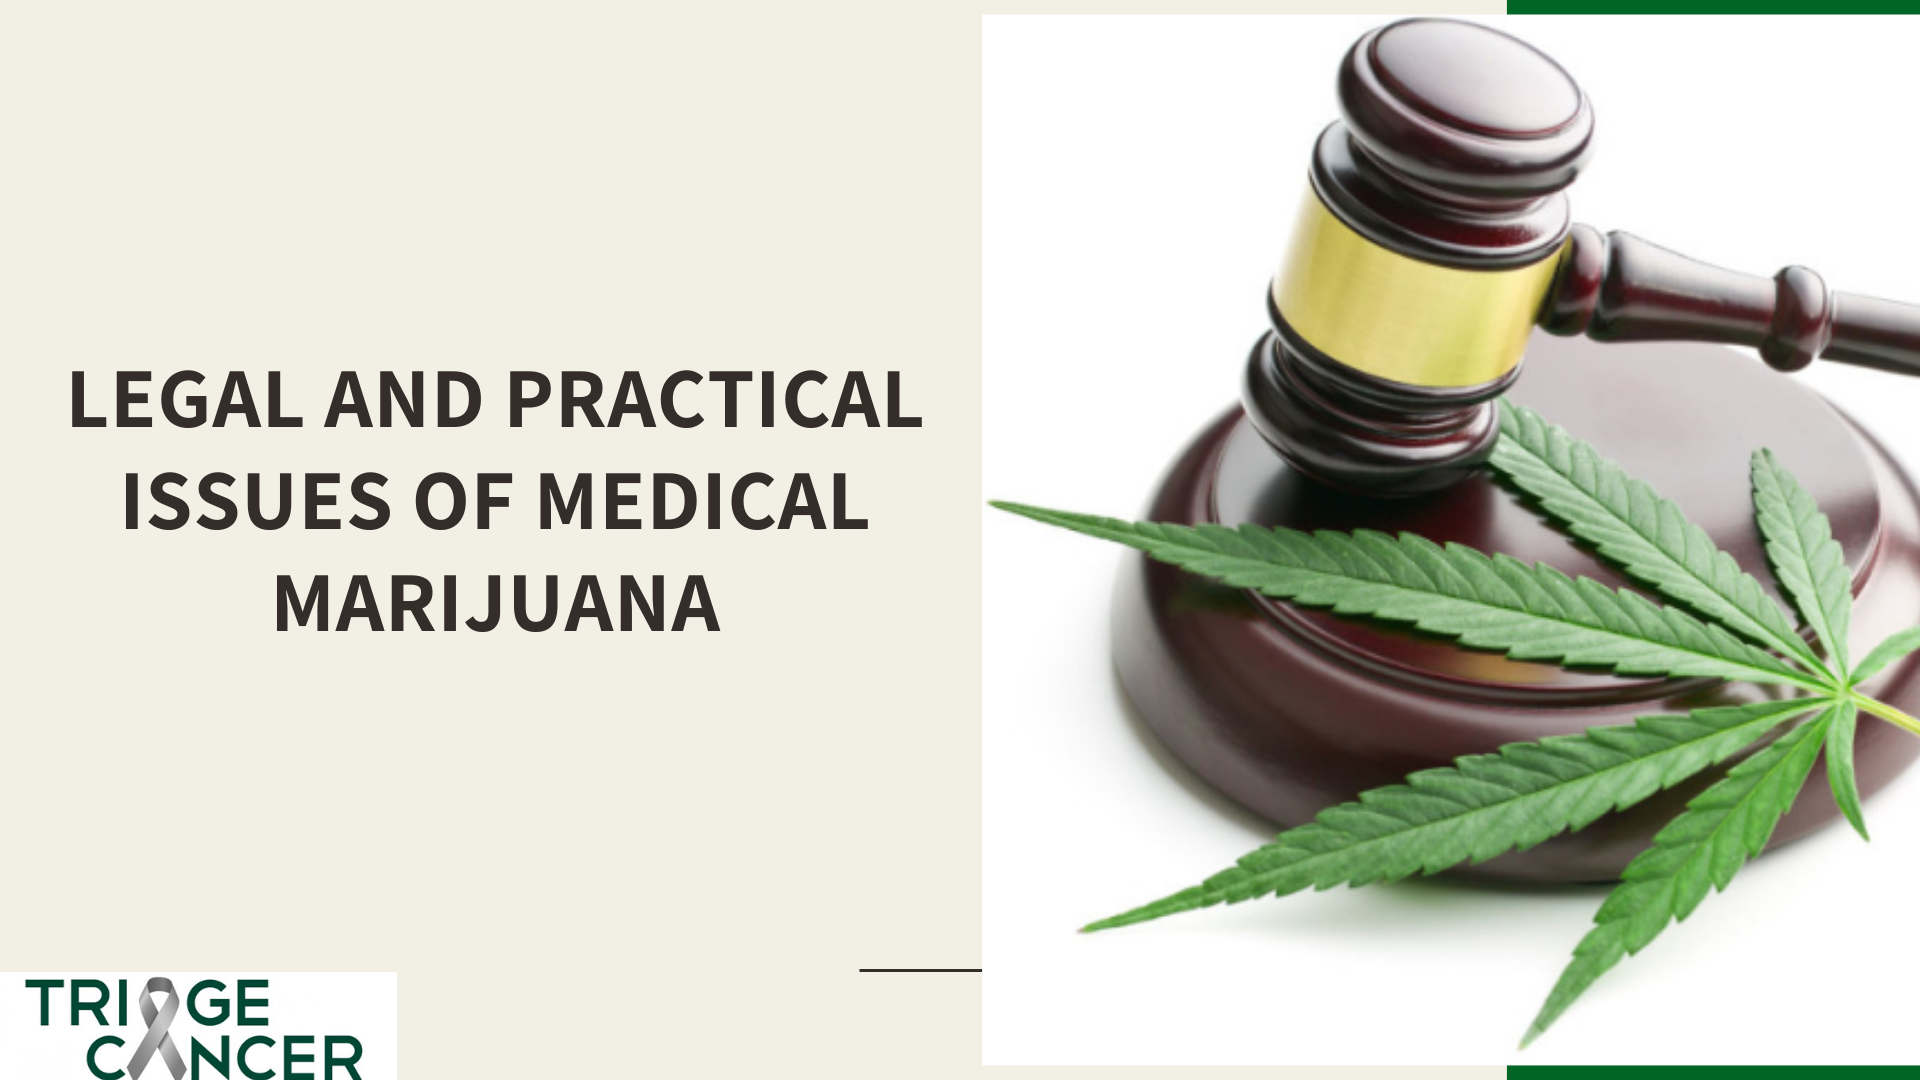 Legal and Practical Issues of Medical Marijuana